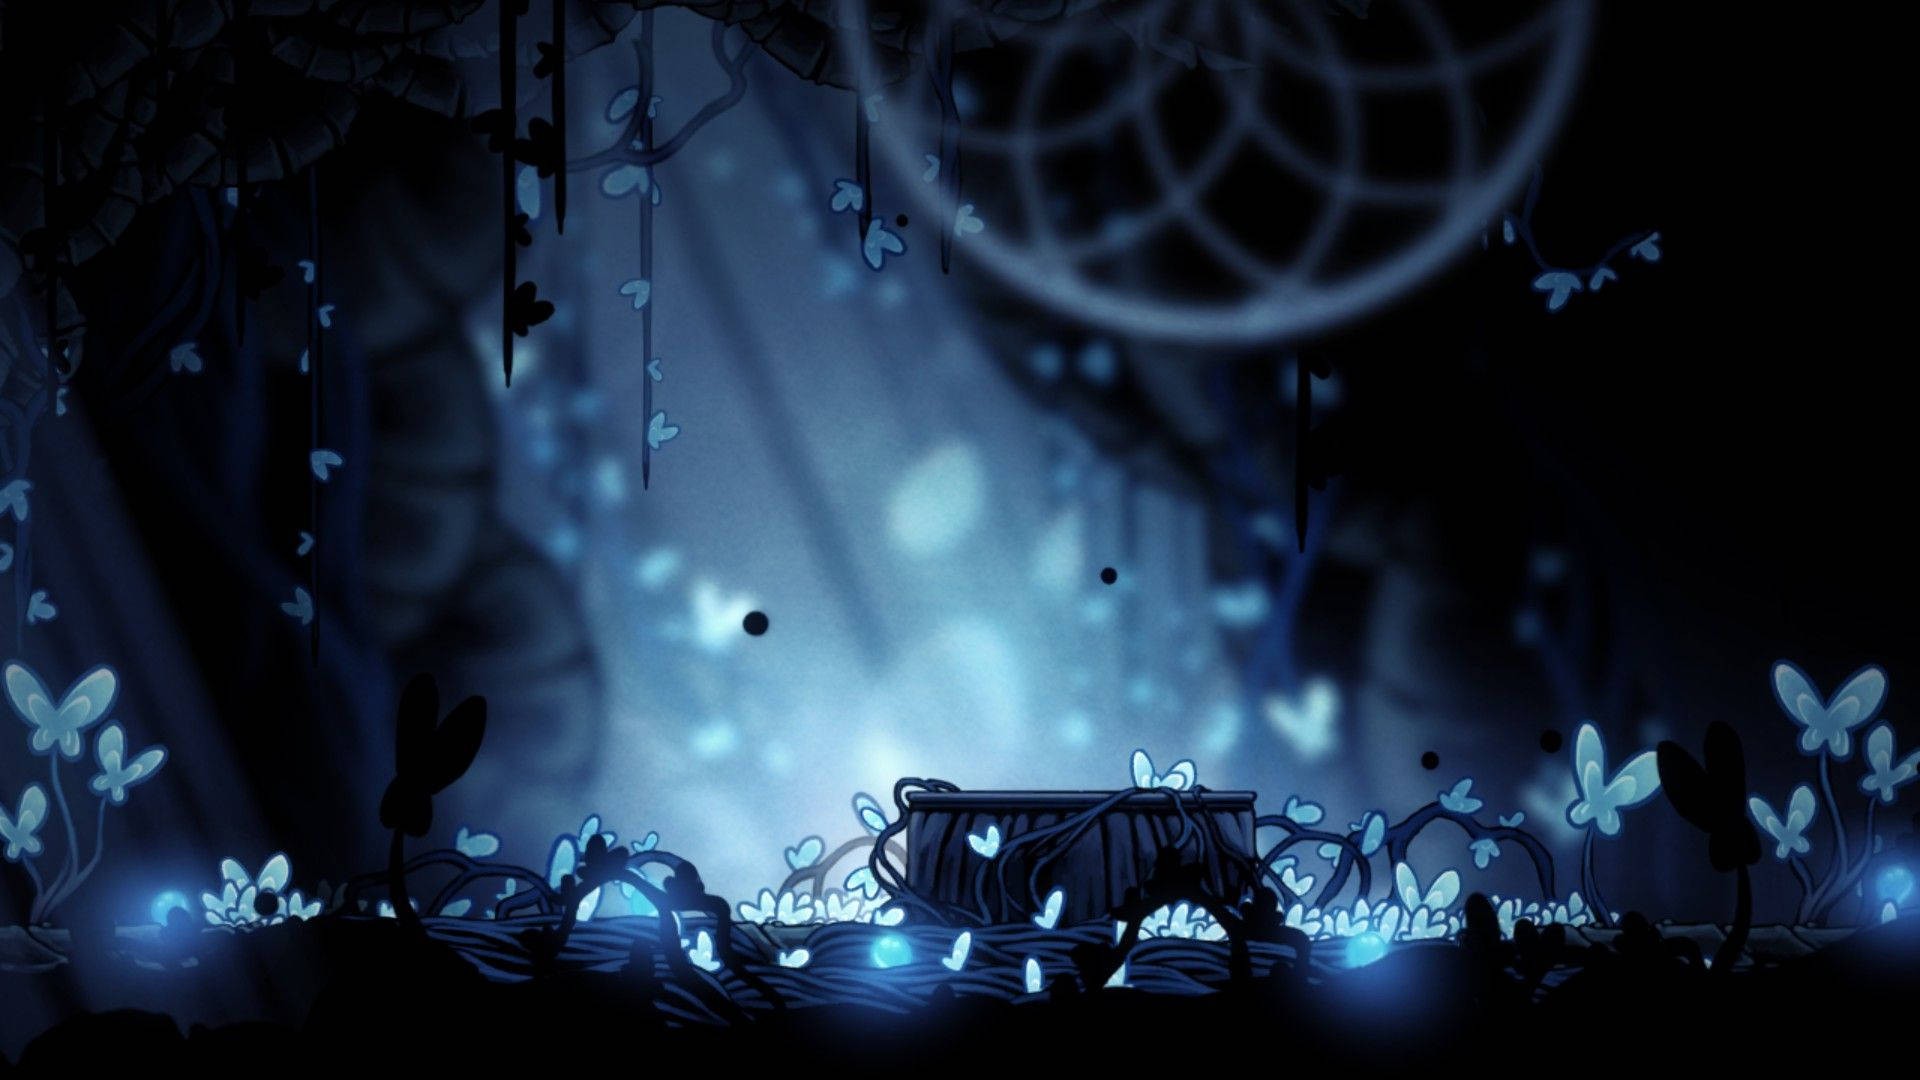 Embrace life's adversities and discover a world of wonder with the Hollow Knight and their faithful companions! Wallpaper